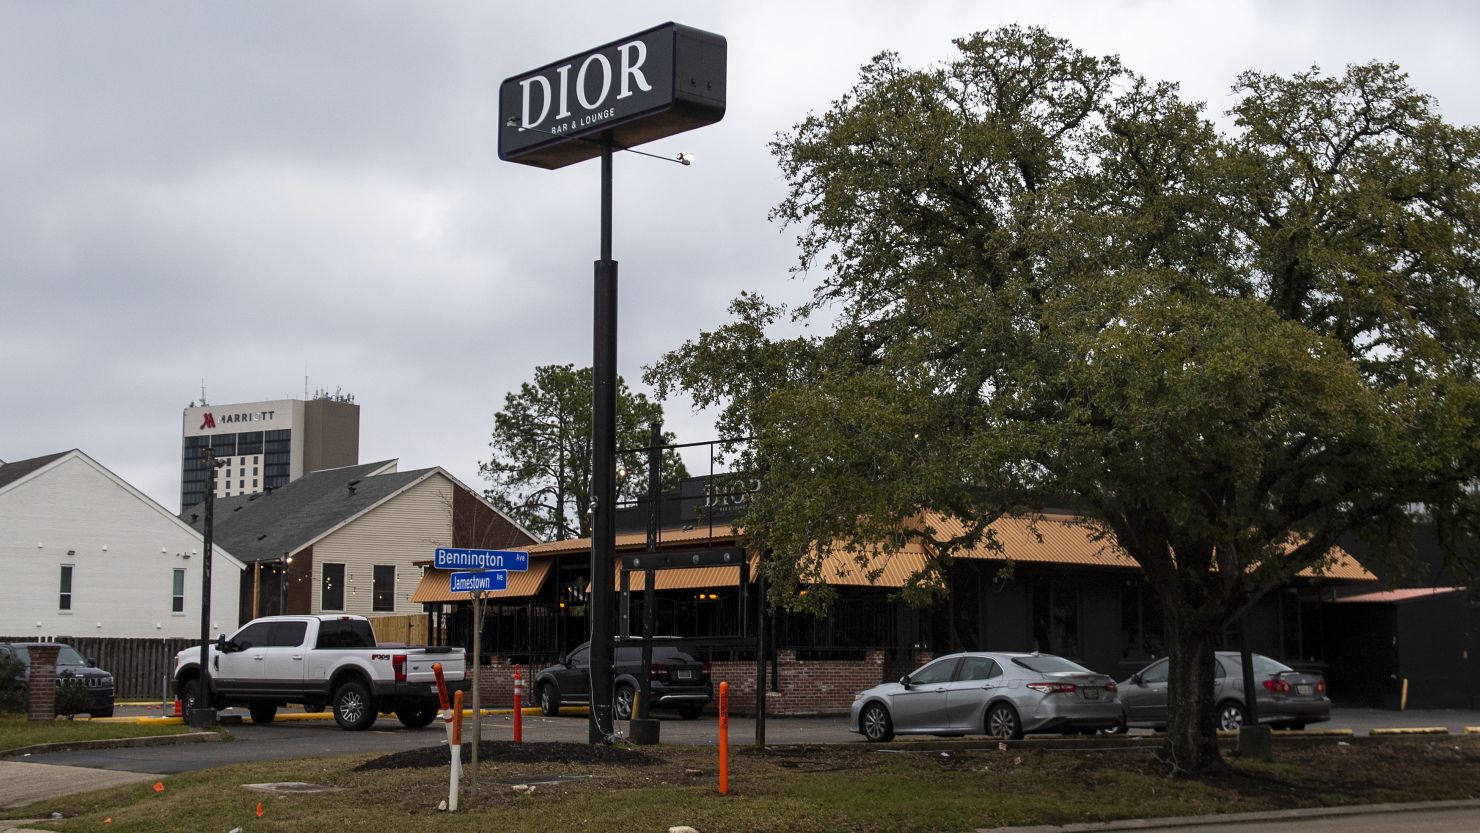 Dior Bar & Lounge was the scene of an overnight shooting that left multiple people injured on Sunday, Jan. 22, 2023, in Baton Rouge, Louisiana.